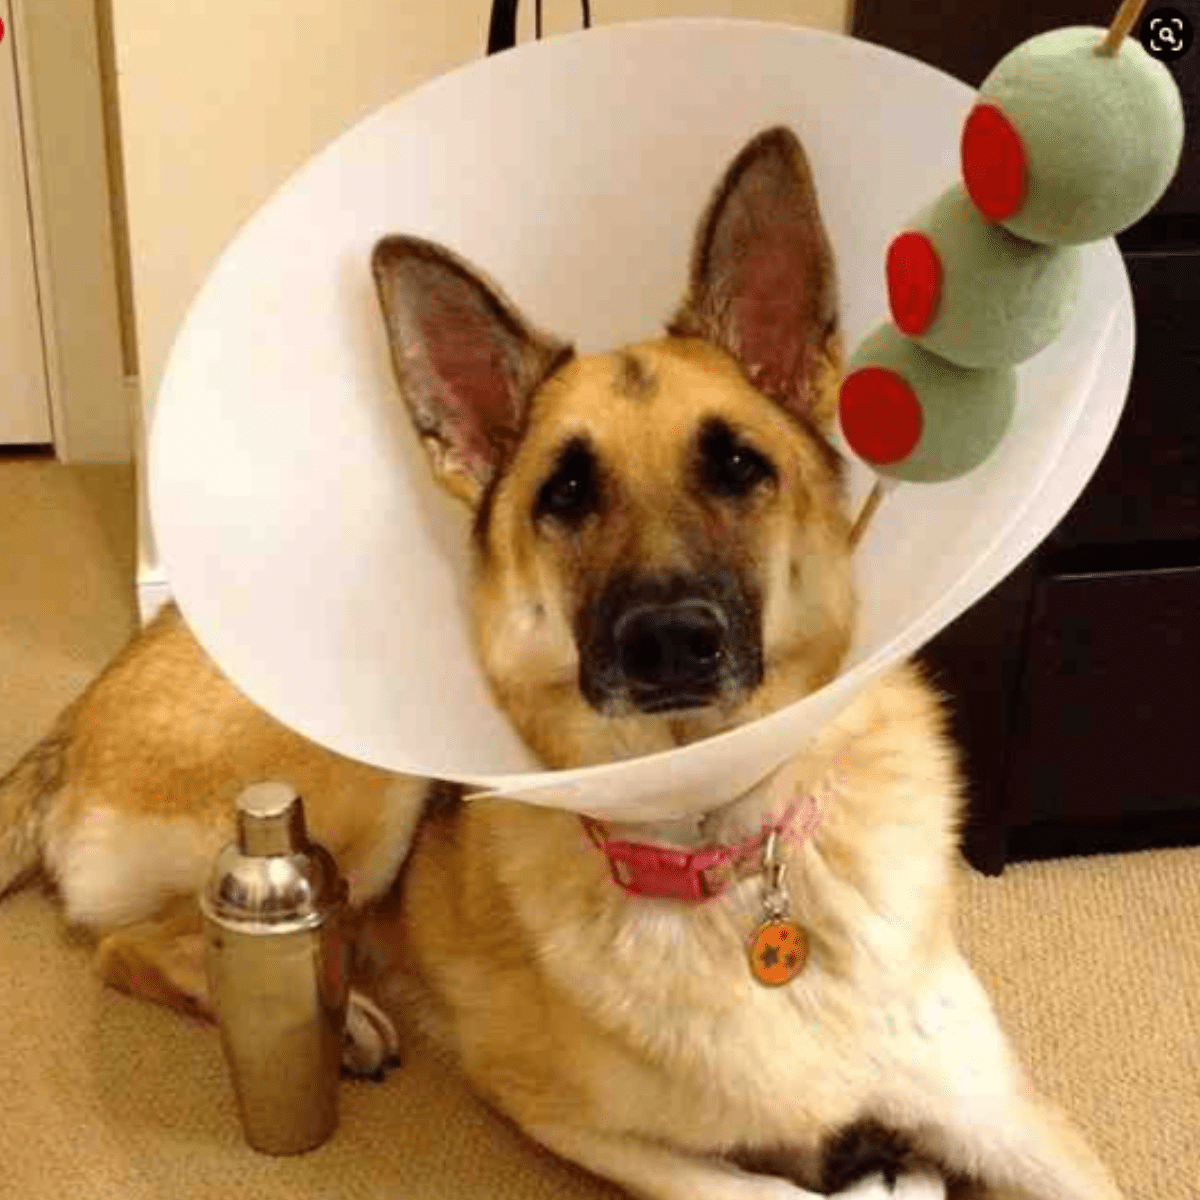 German shepherd in a plastic cone with olives to make a doggie martini costume